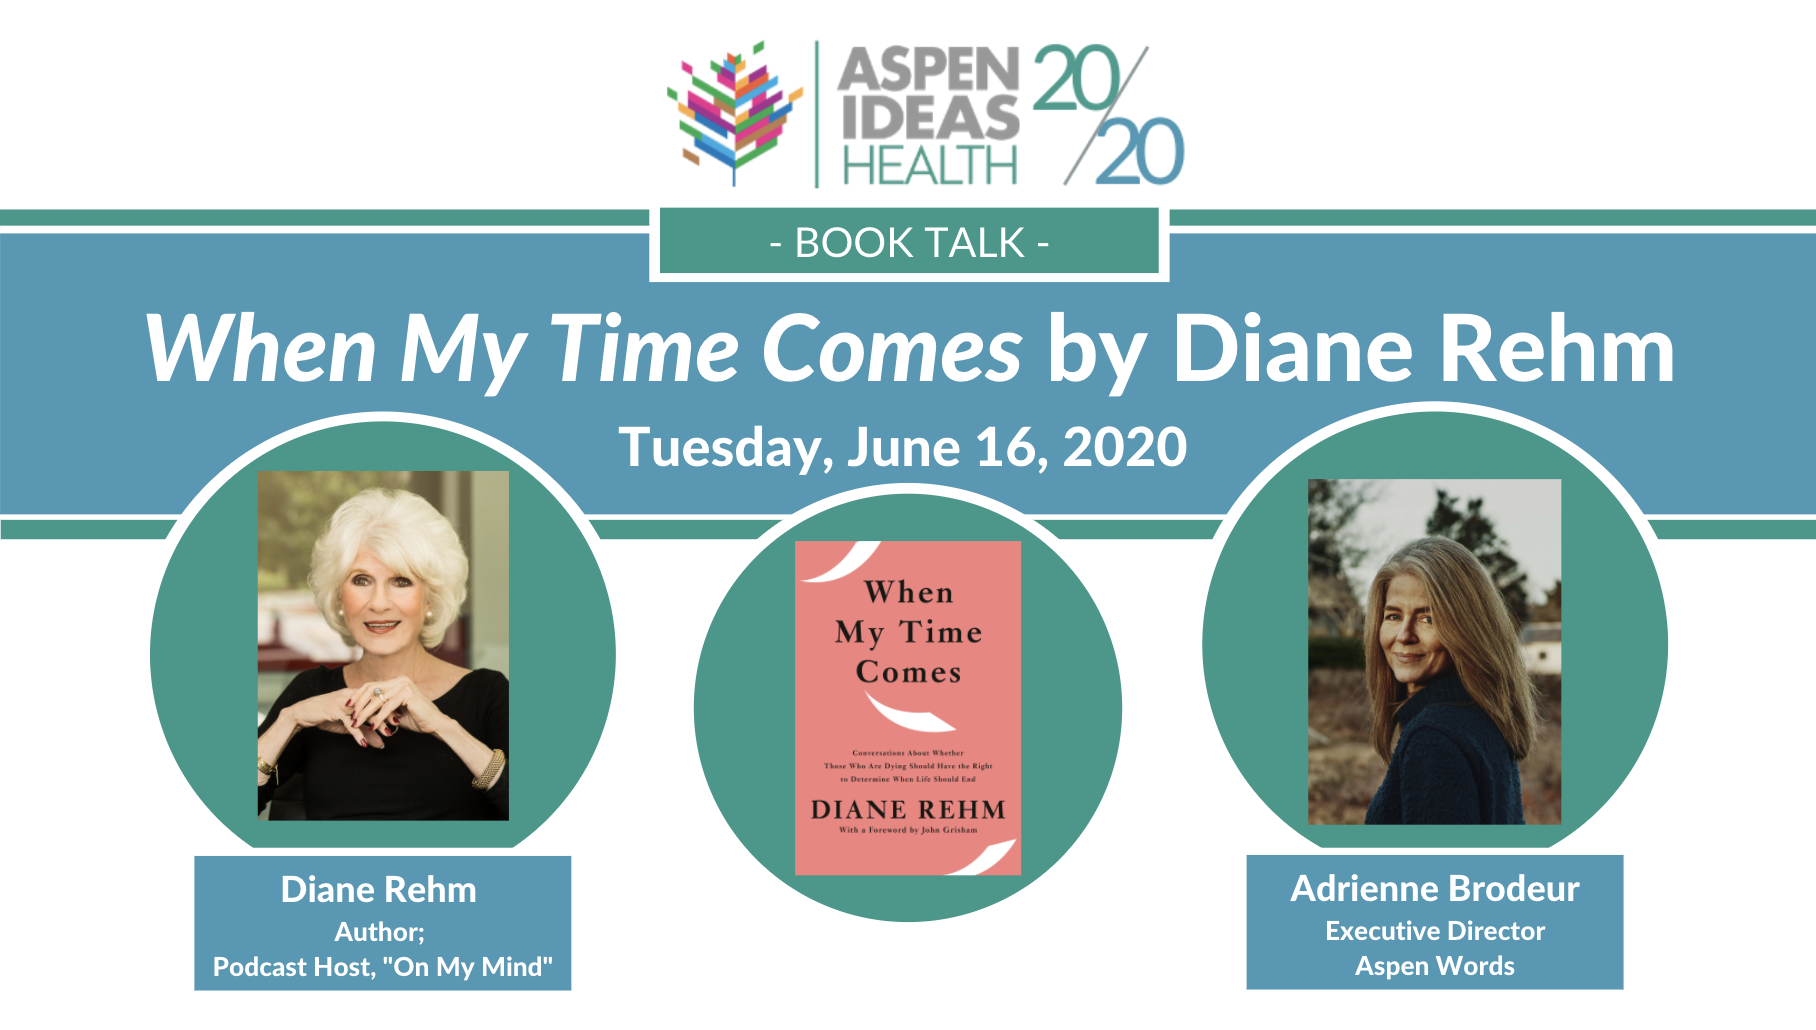 Diane Rehm: When My Time Comes